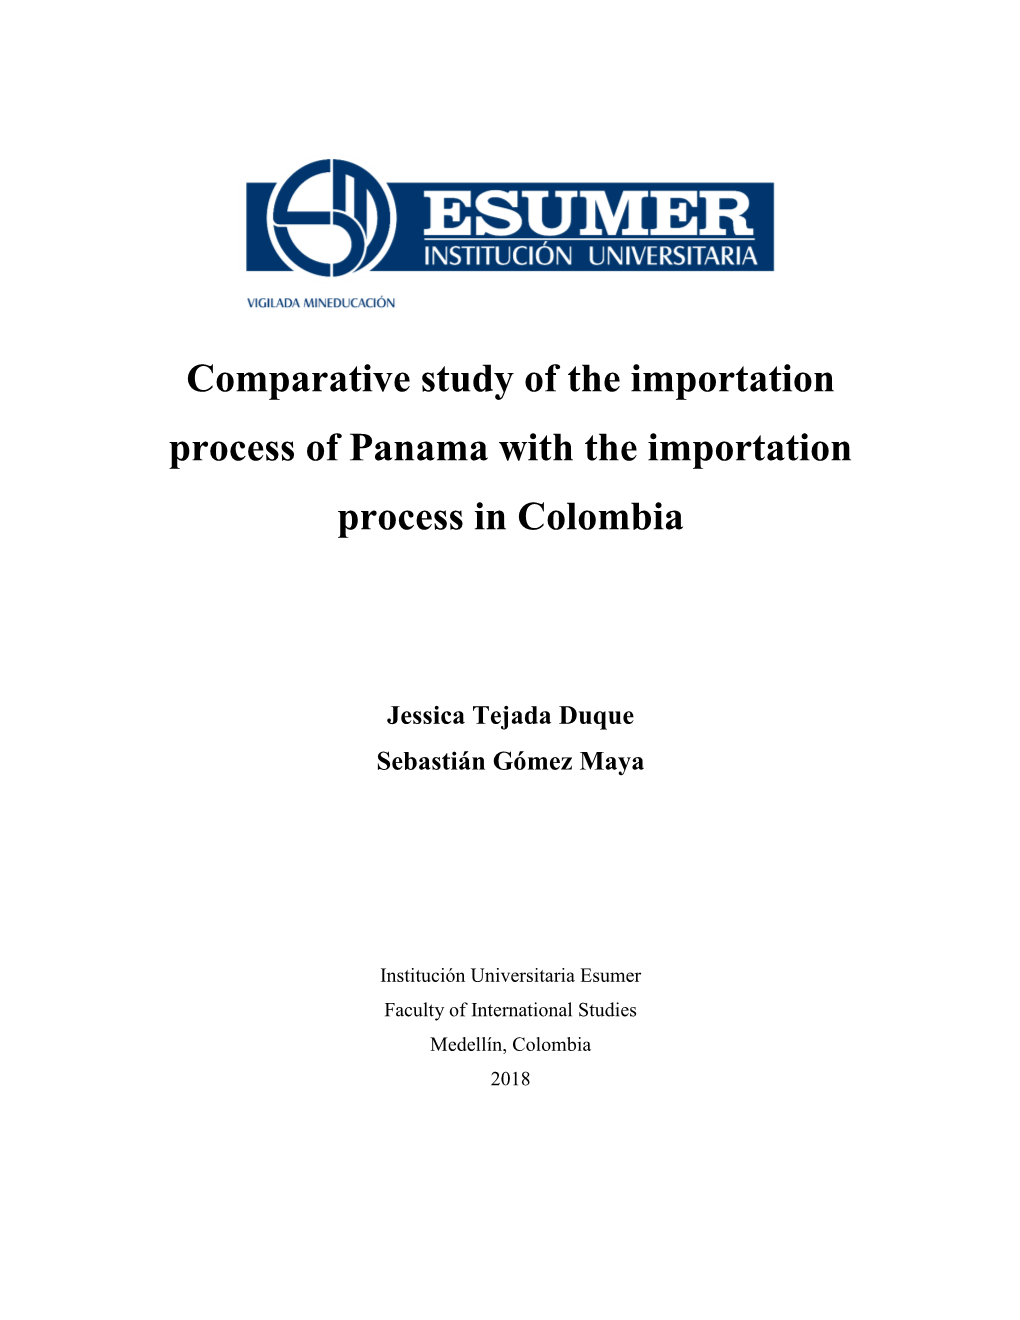 Comparative Study of the Importation Process of Panama with the Importation Process in Colombia